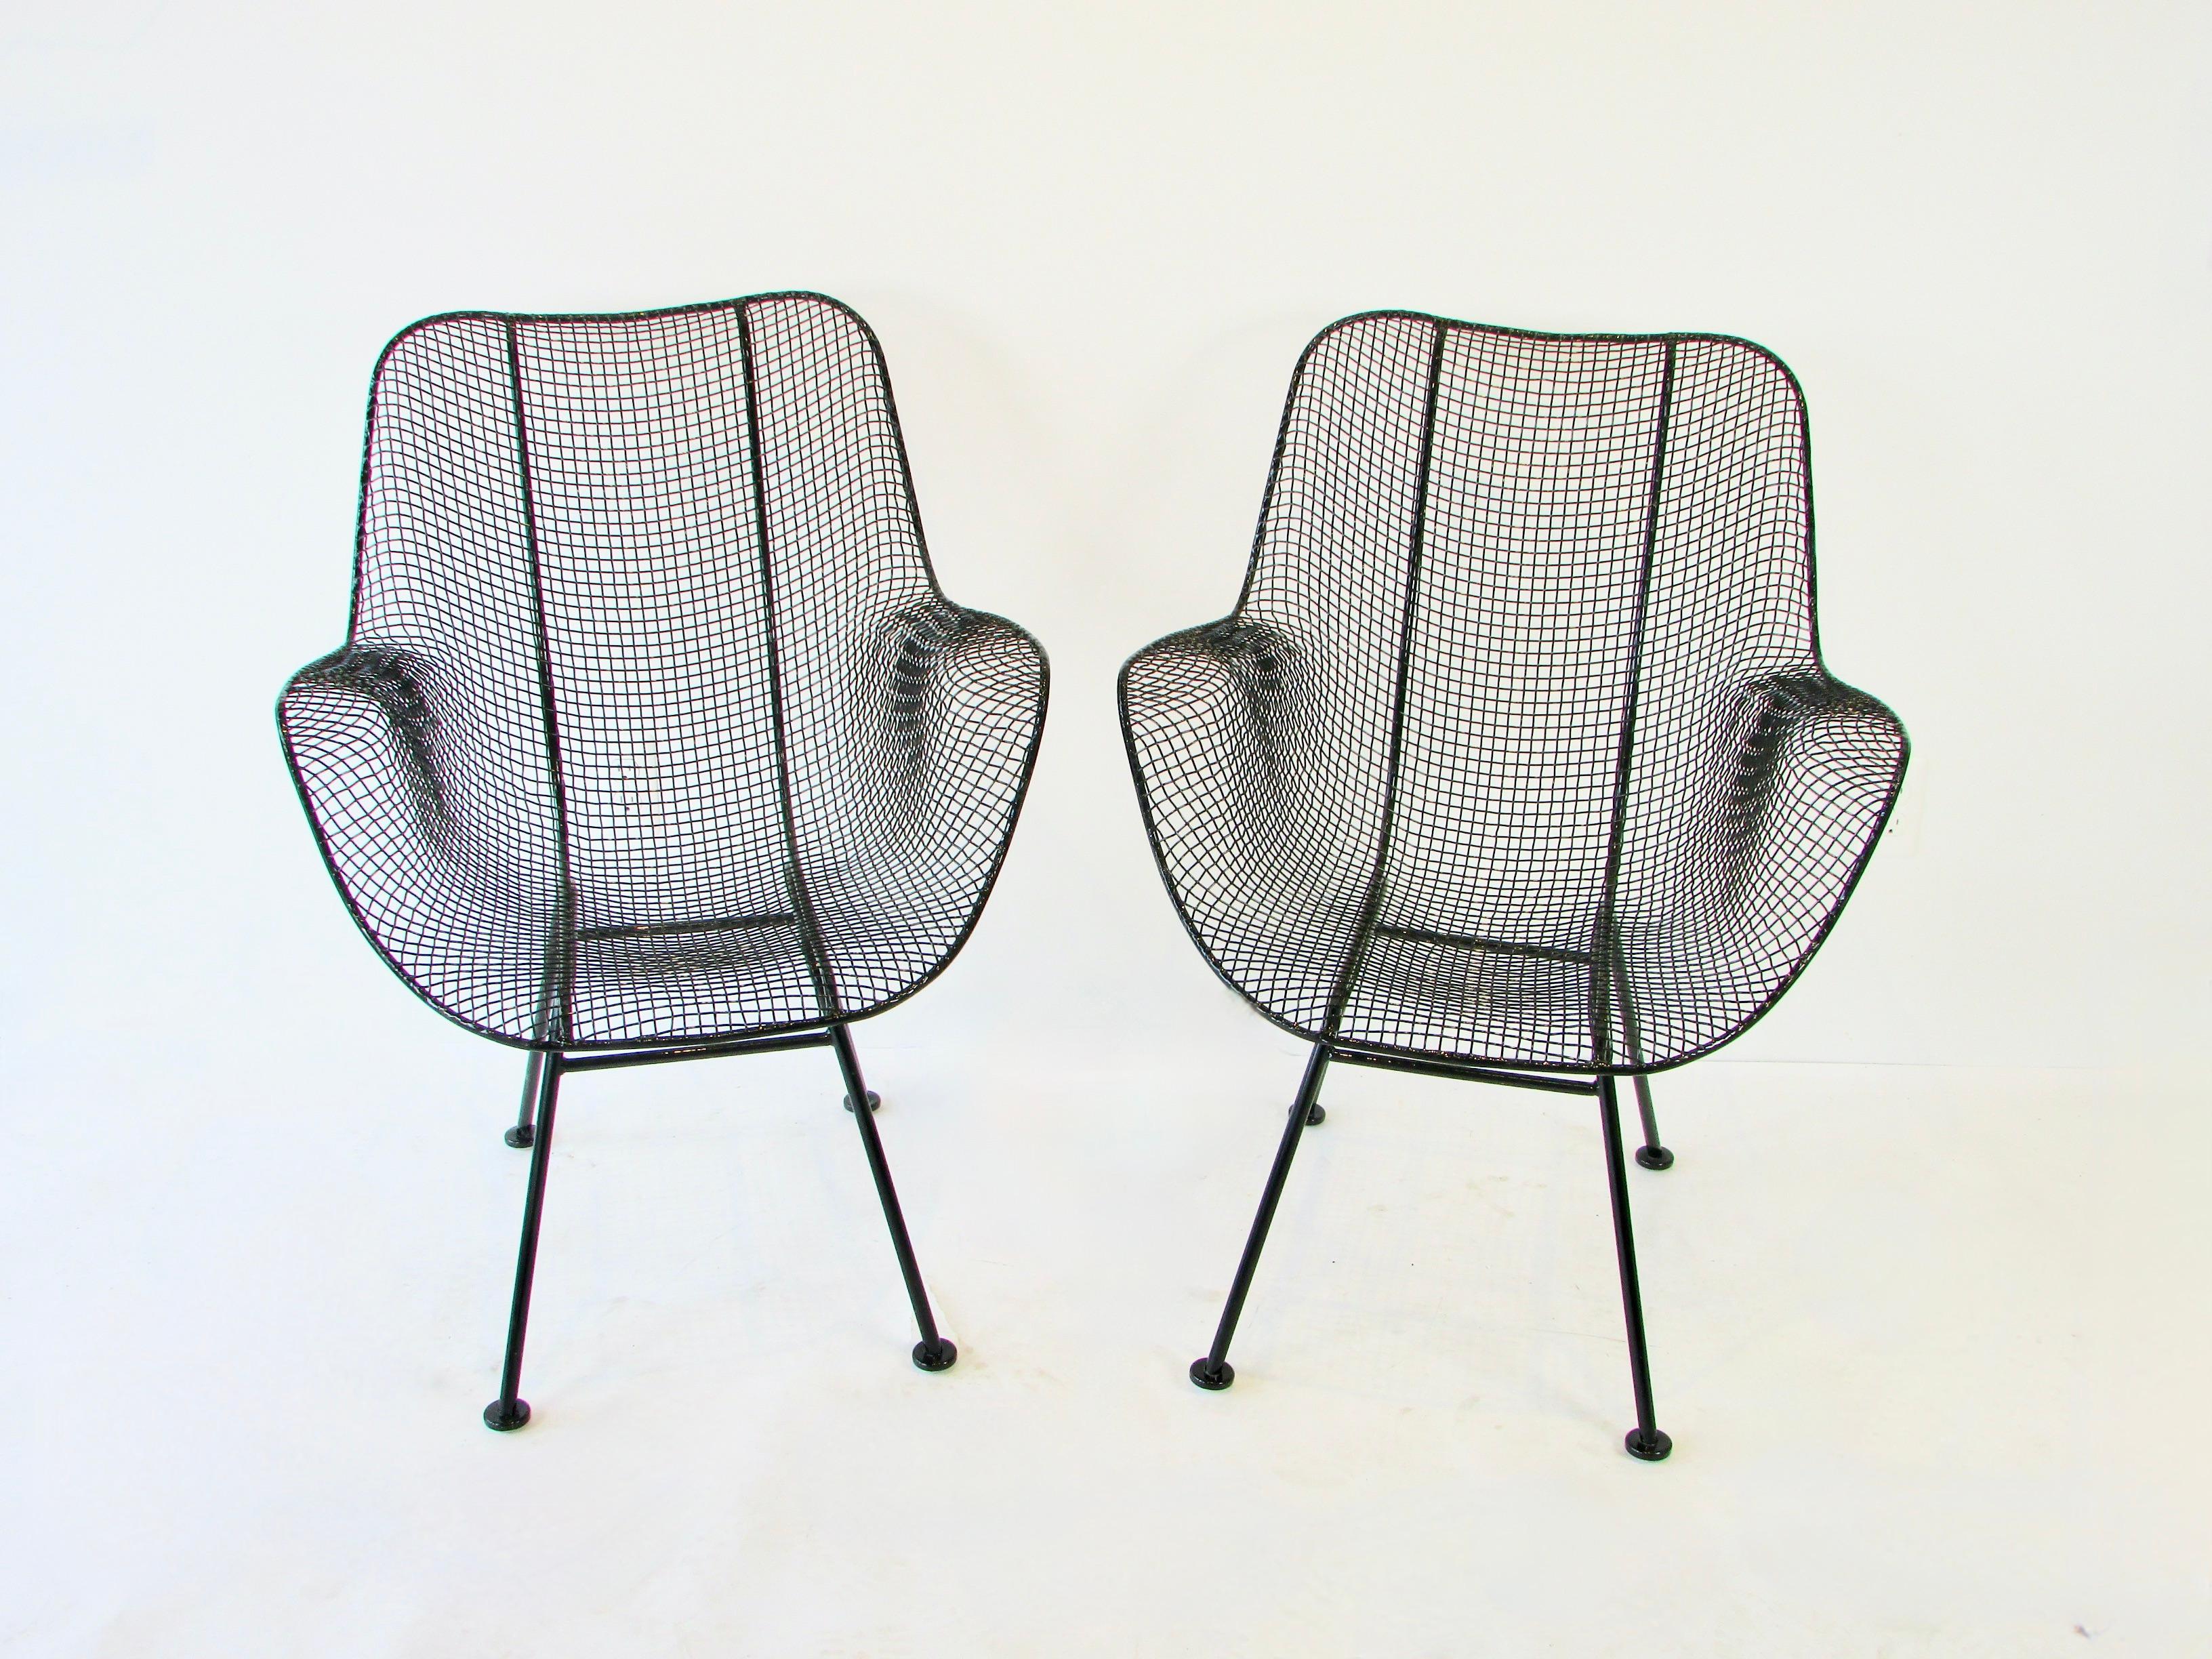 Pair of black Woodard Wrought Iron with Steel Mesh Tall Back Lounge Chairs In Good Condition For Sale In Ferndale, MI